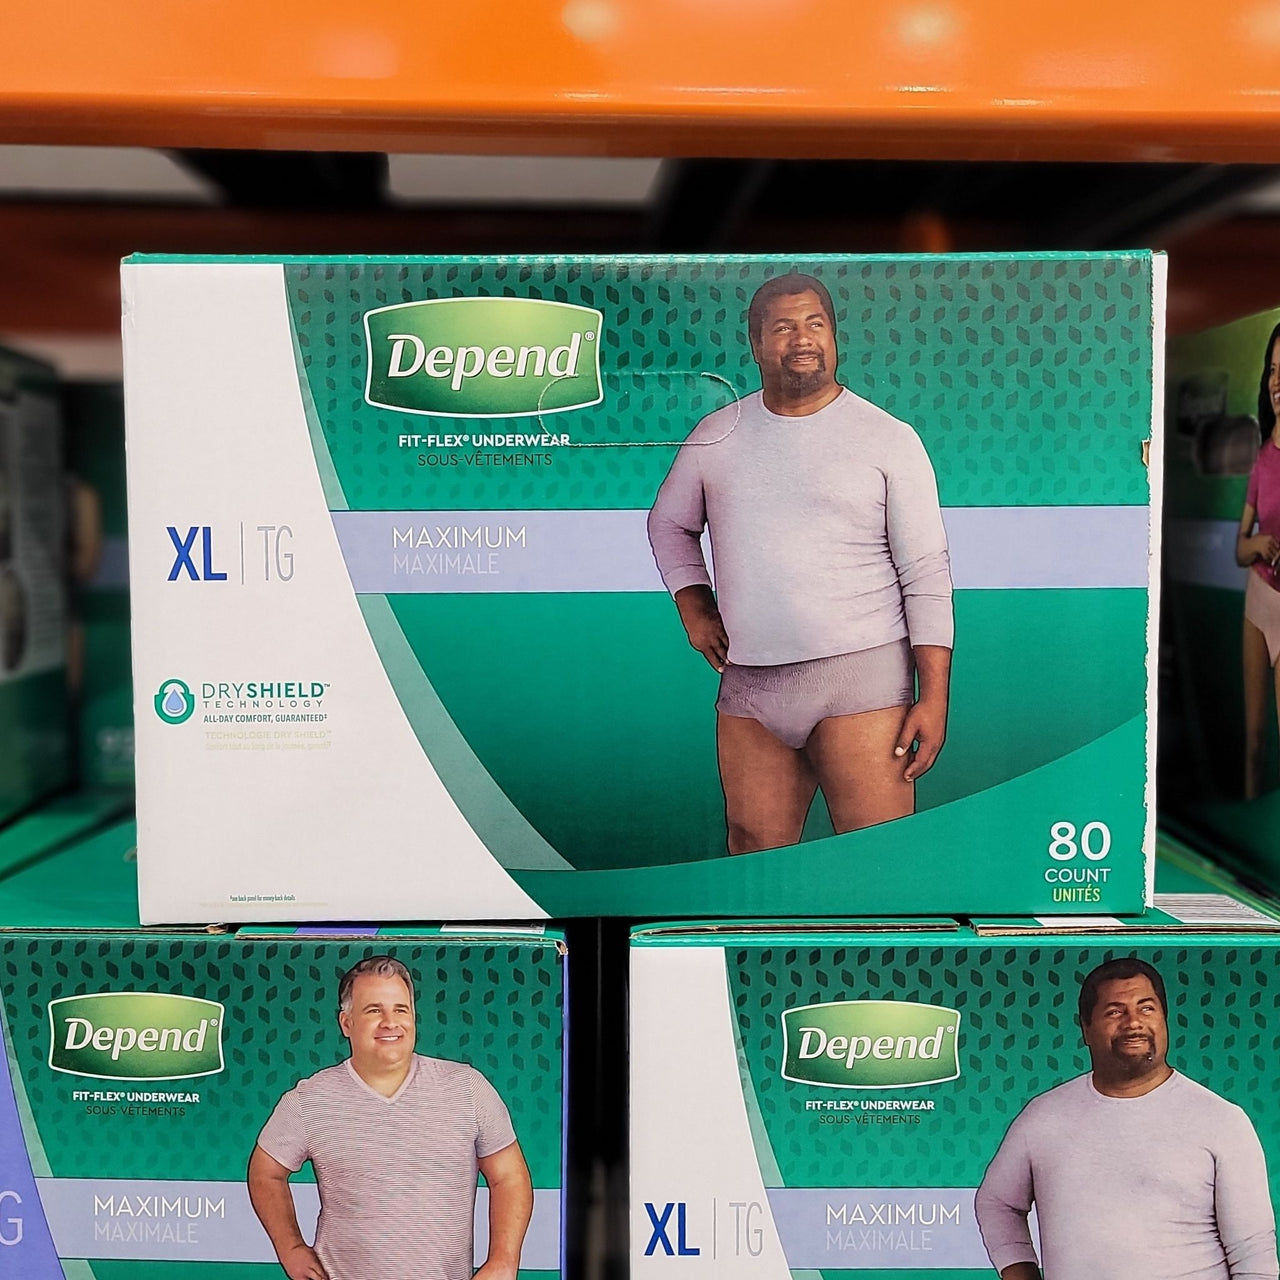 Depend Underwear For Women, Small, 92-pack Shipped to Nunavut